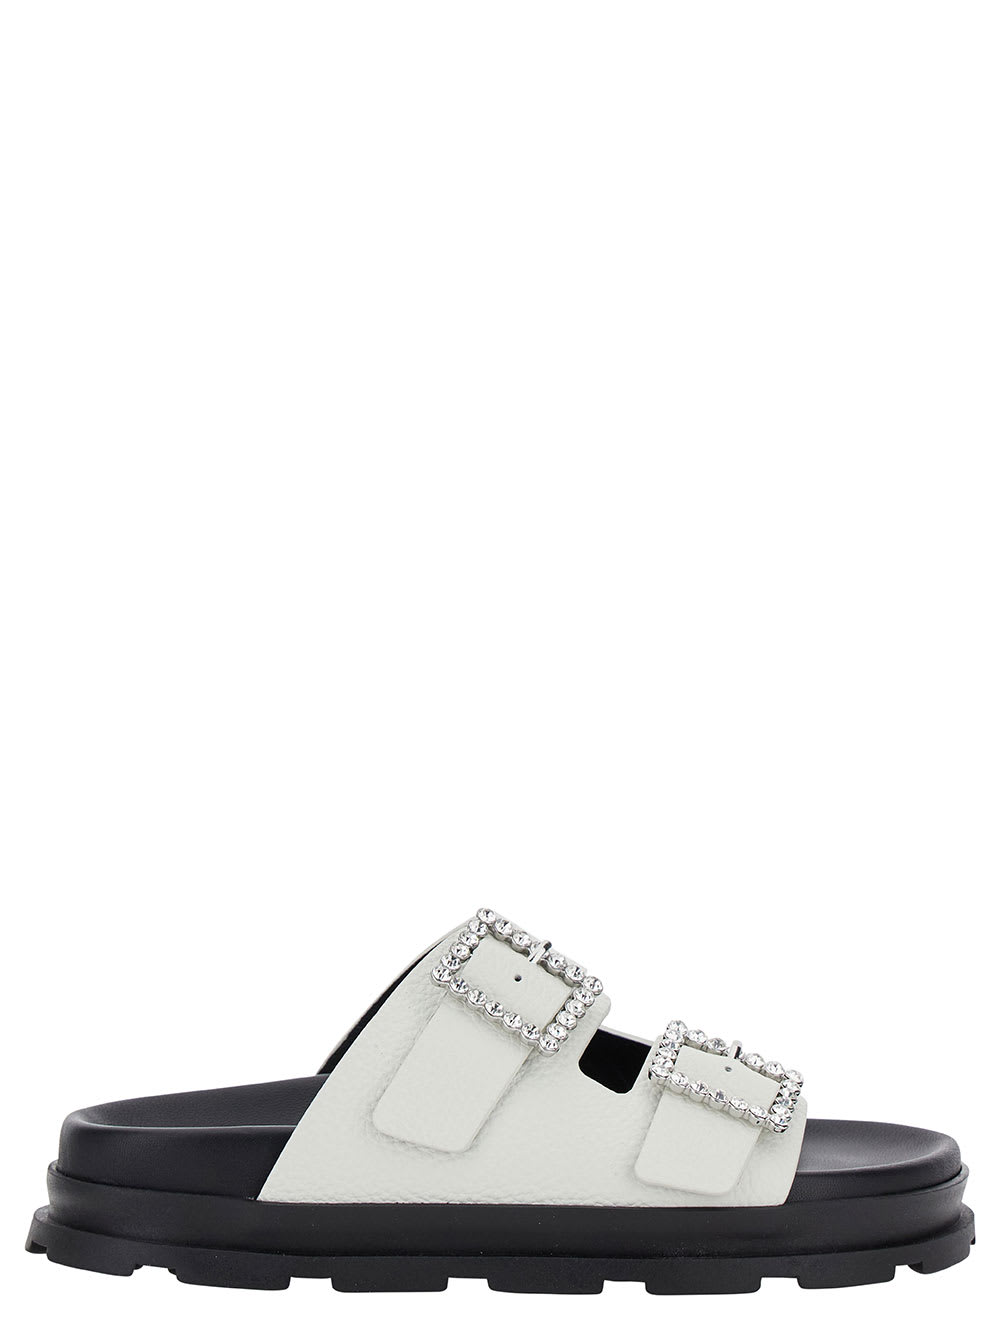 White Sandals With Rhinestone Buckle In Hammered Leather Woman